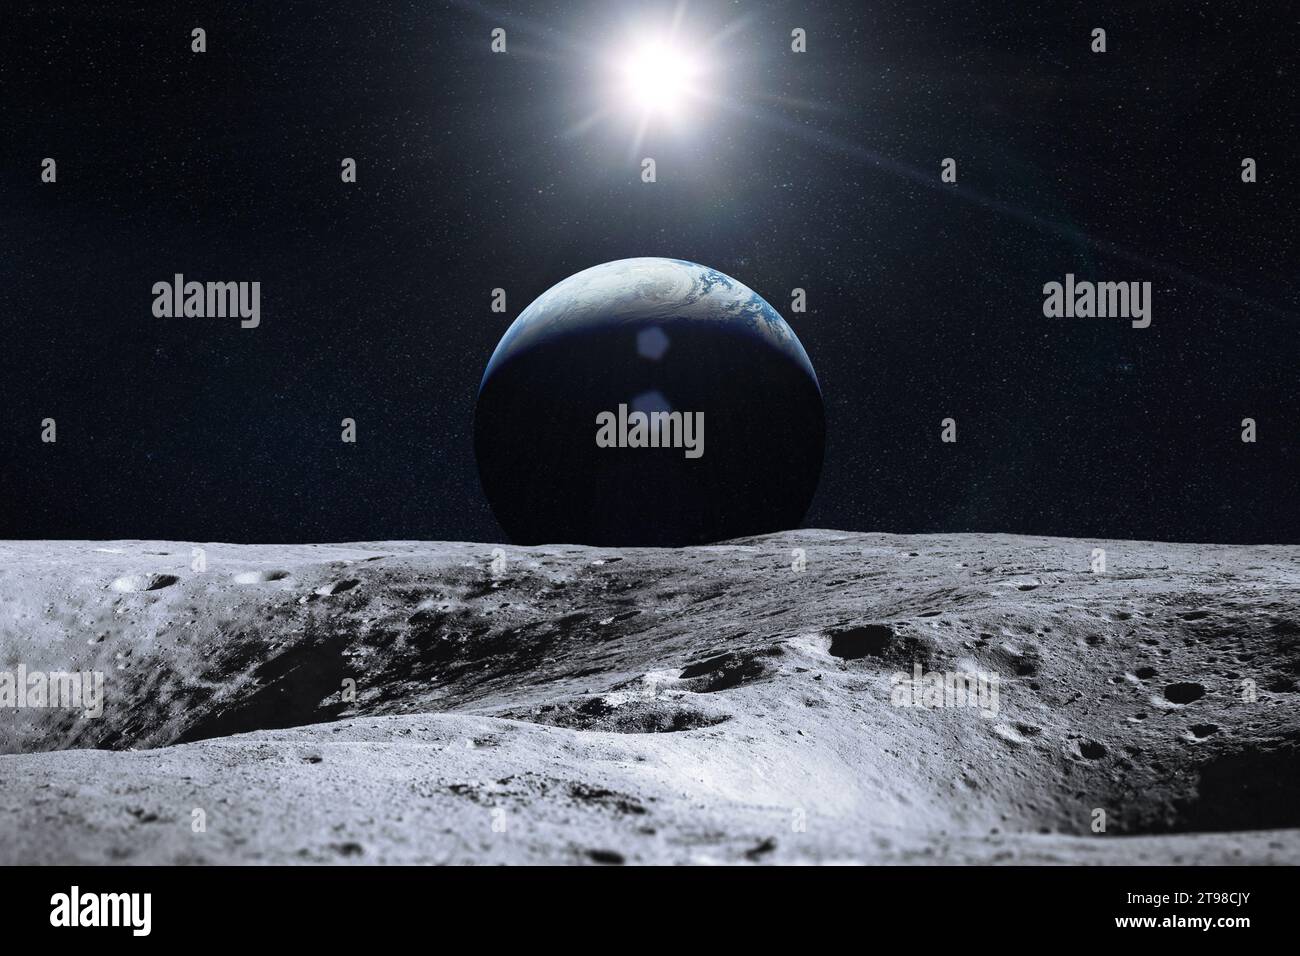 Earth planet from Moon surface. Moon and Earth. Elements of this image furnished by NASA. Stock Photo